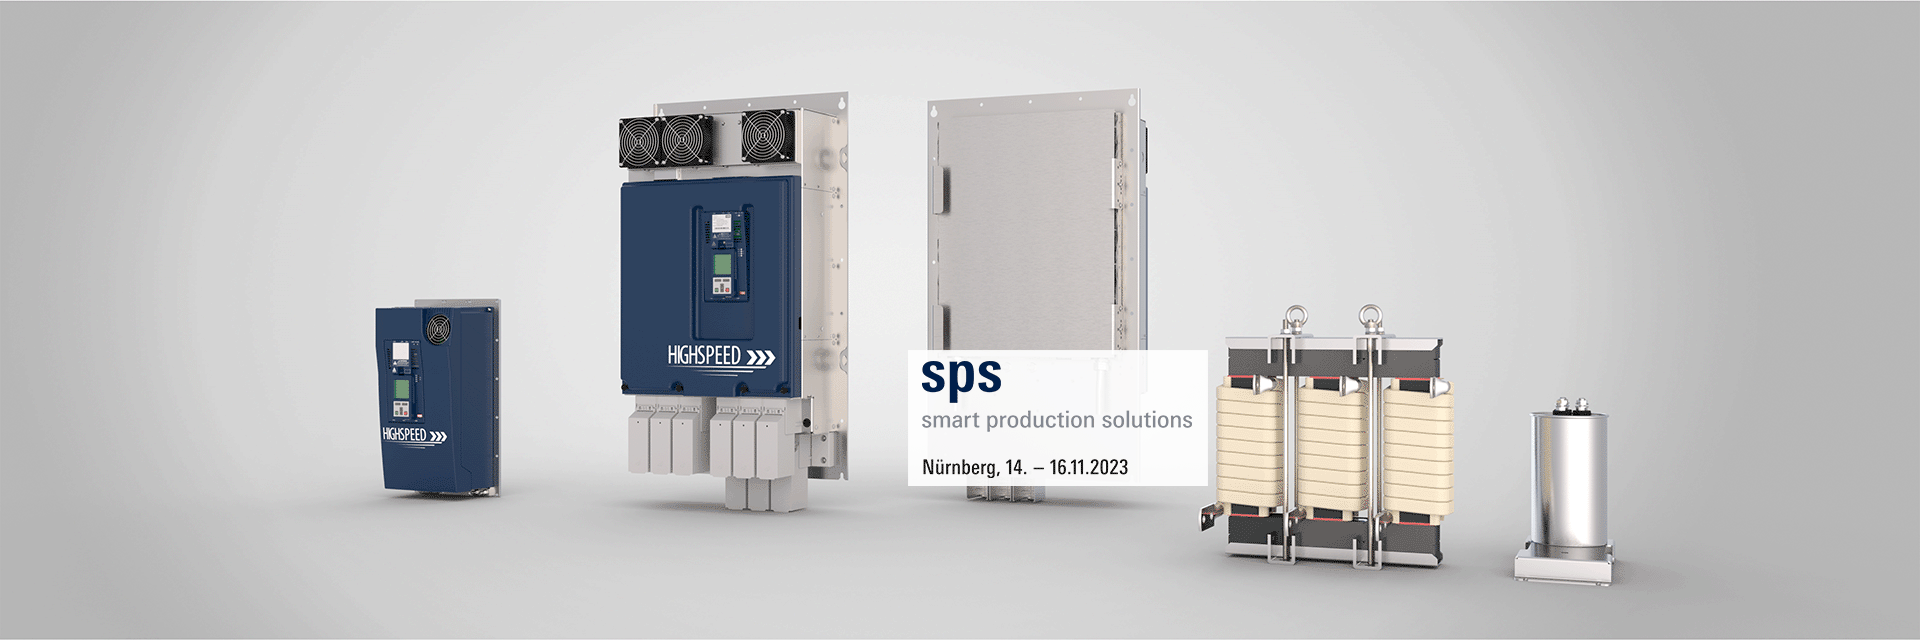 Group picture of the high speed drives manufactured and distributed by KEB Automation on grey background with the logo of the SPS 2023